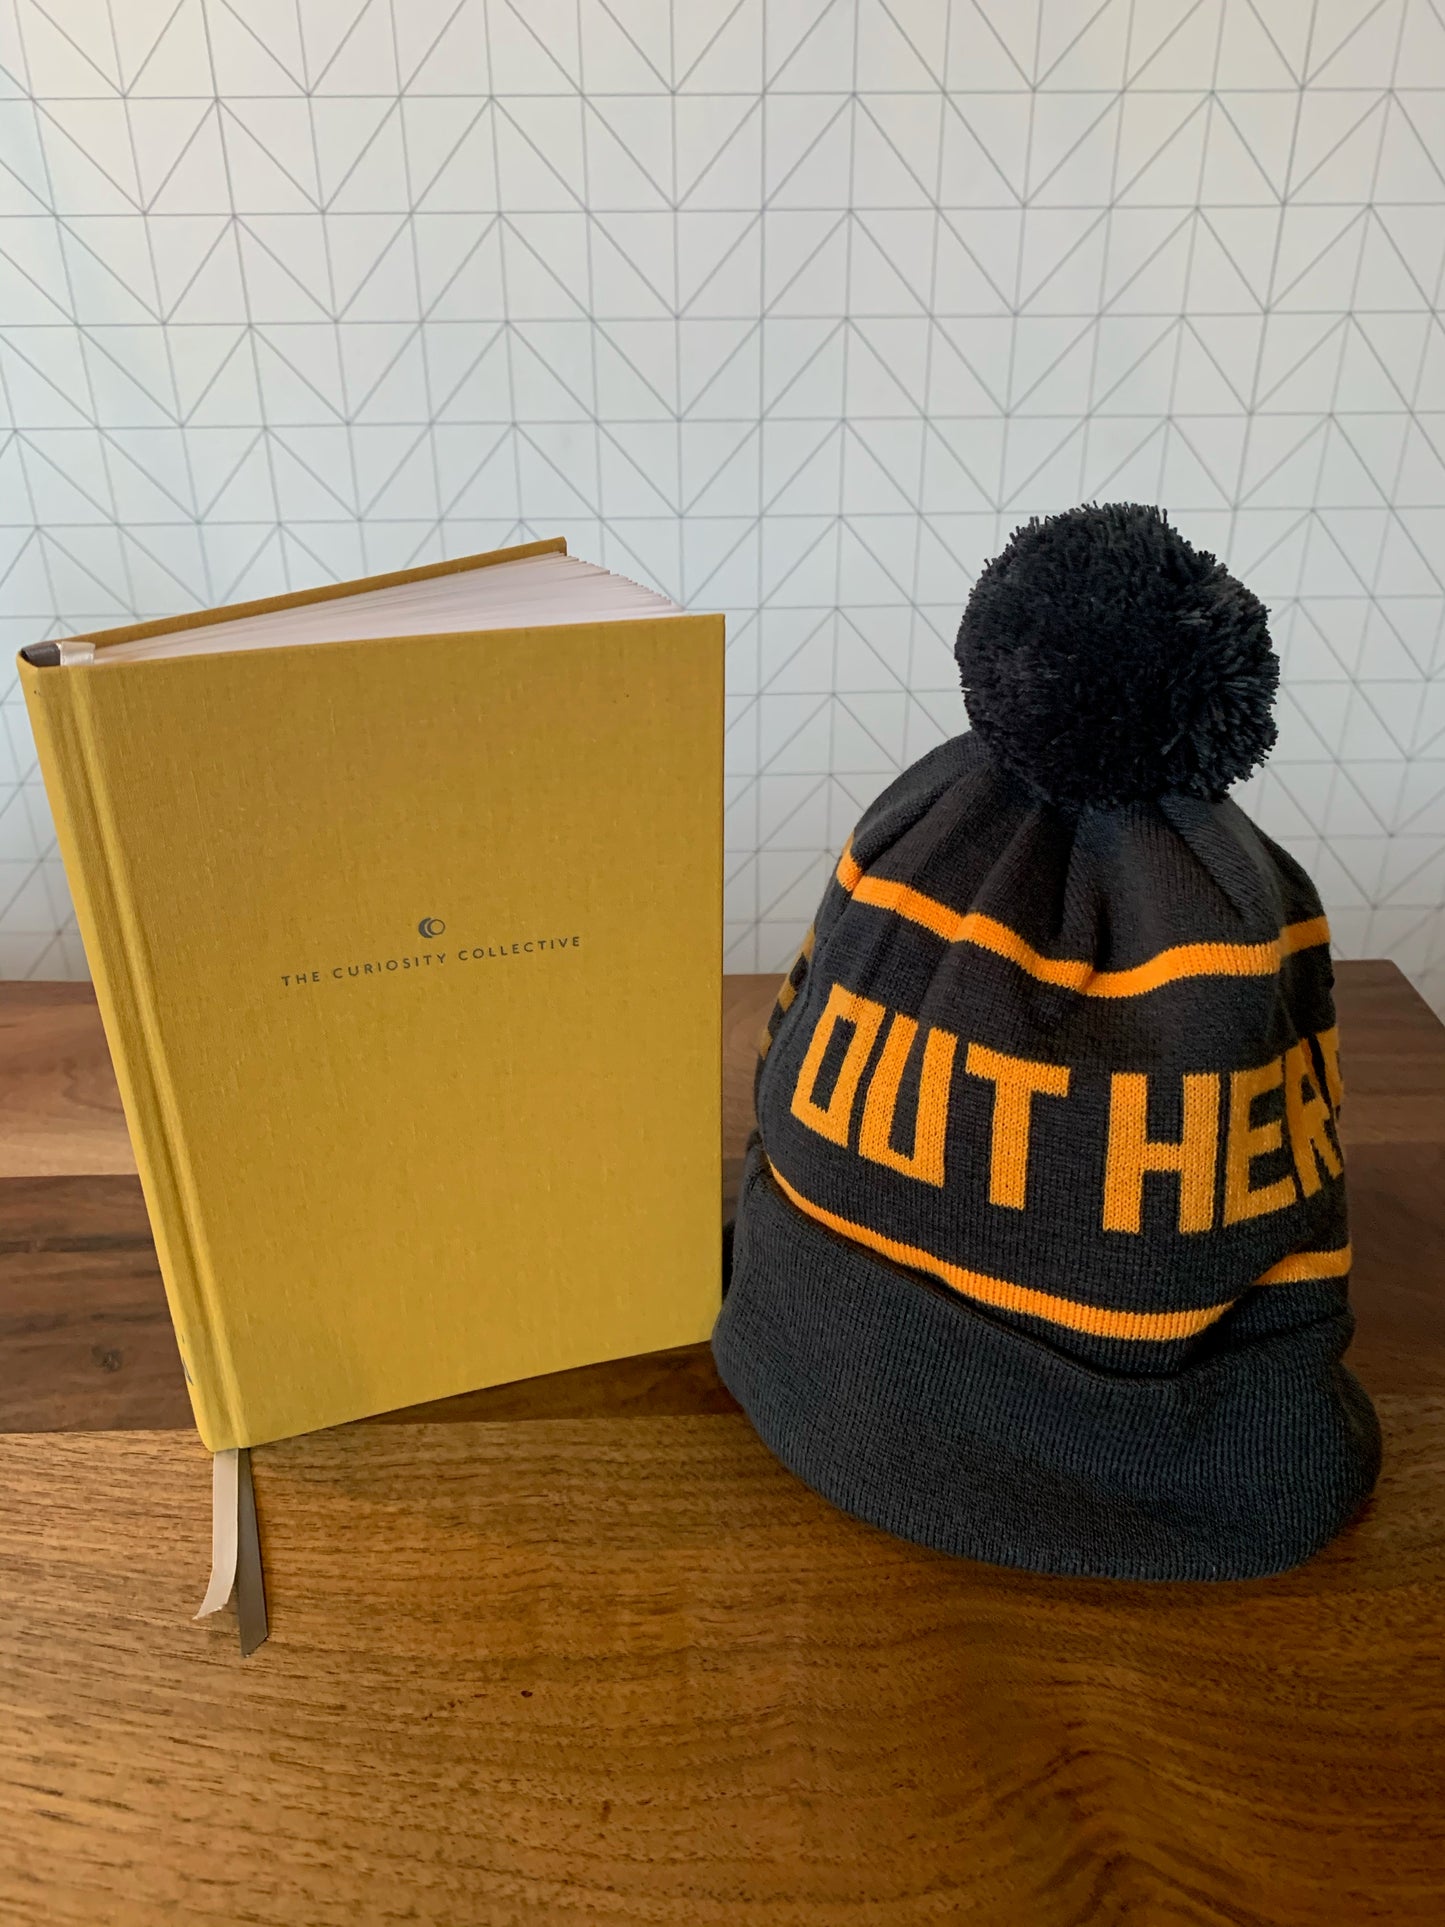 BUNDLE: The Curiosity Collective Journal & OHY Knit Beanie